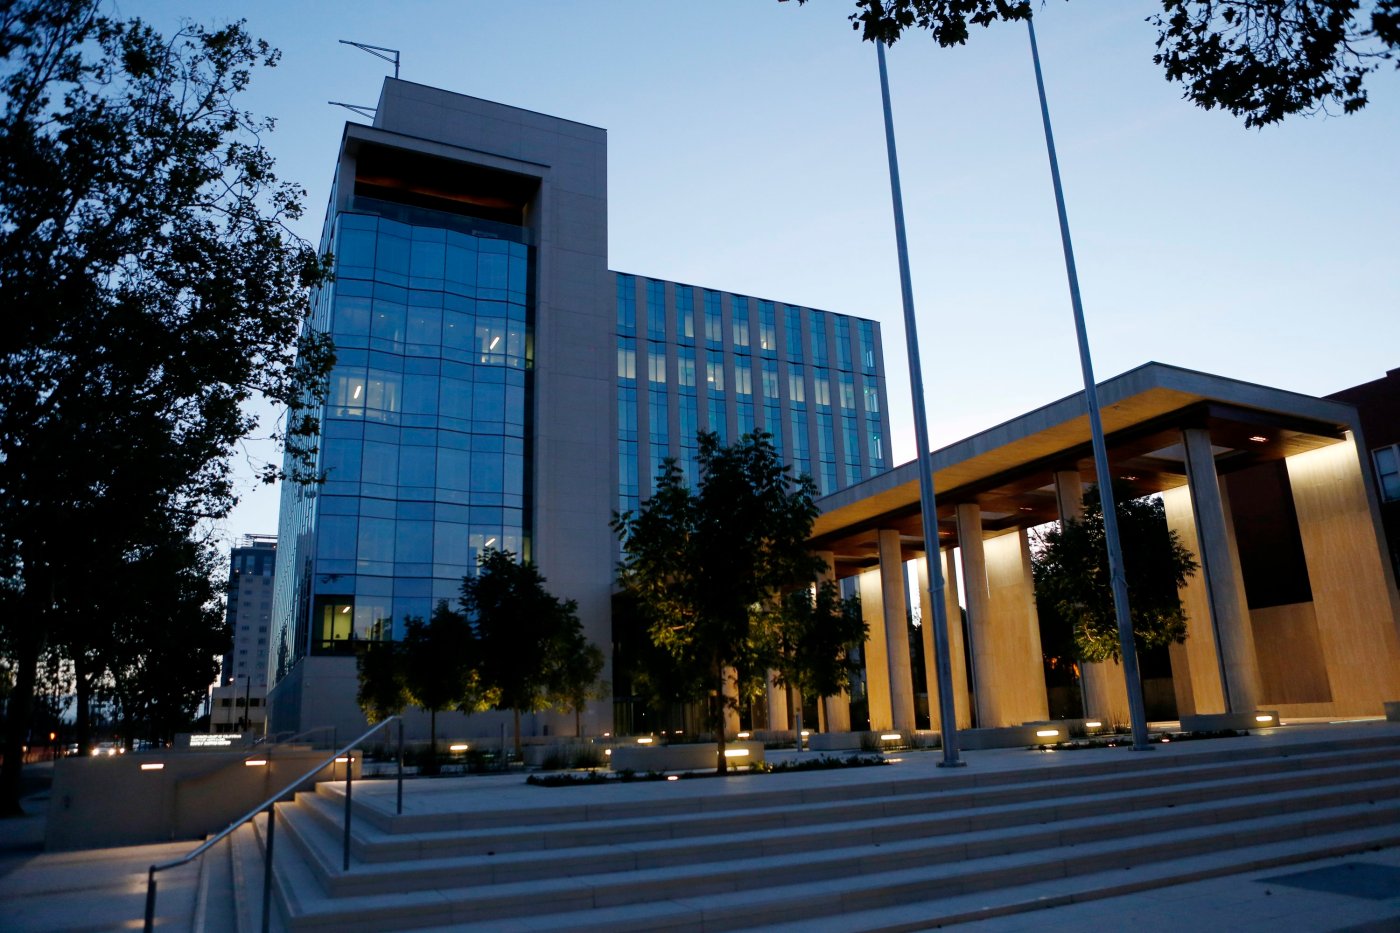 san-jose:-after-pg&e-tiff-and-closures,-family-courthouse-restores-full-power